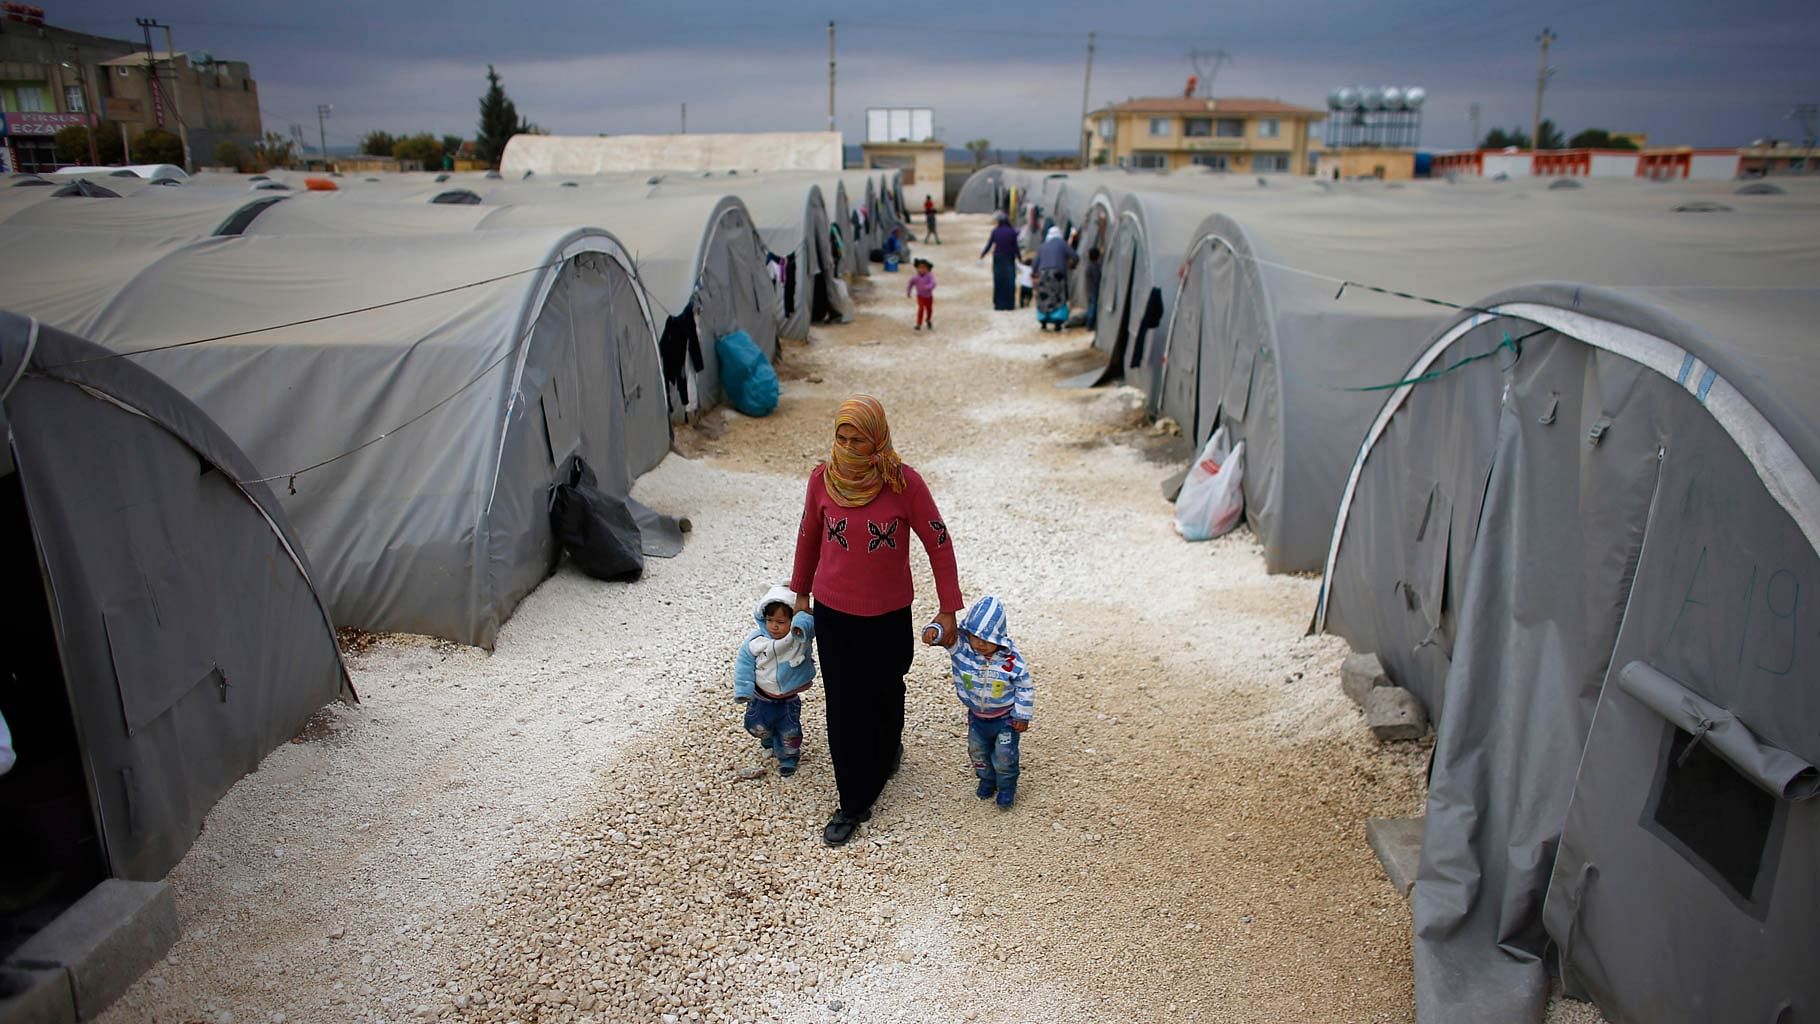 A Kurdish refugee woman from the Syrian town of Kobani walks with her children at a refugee camp in the border town of Suruc, Sanliurfa province. (Photo: Reuters)